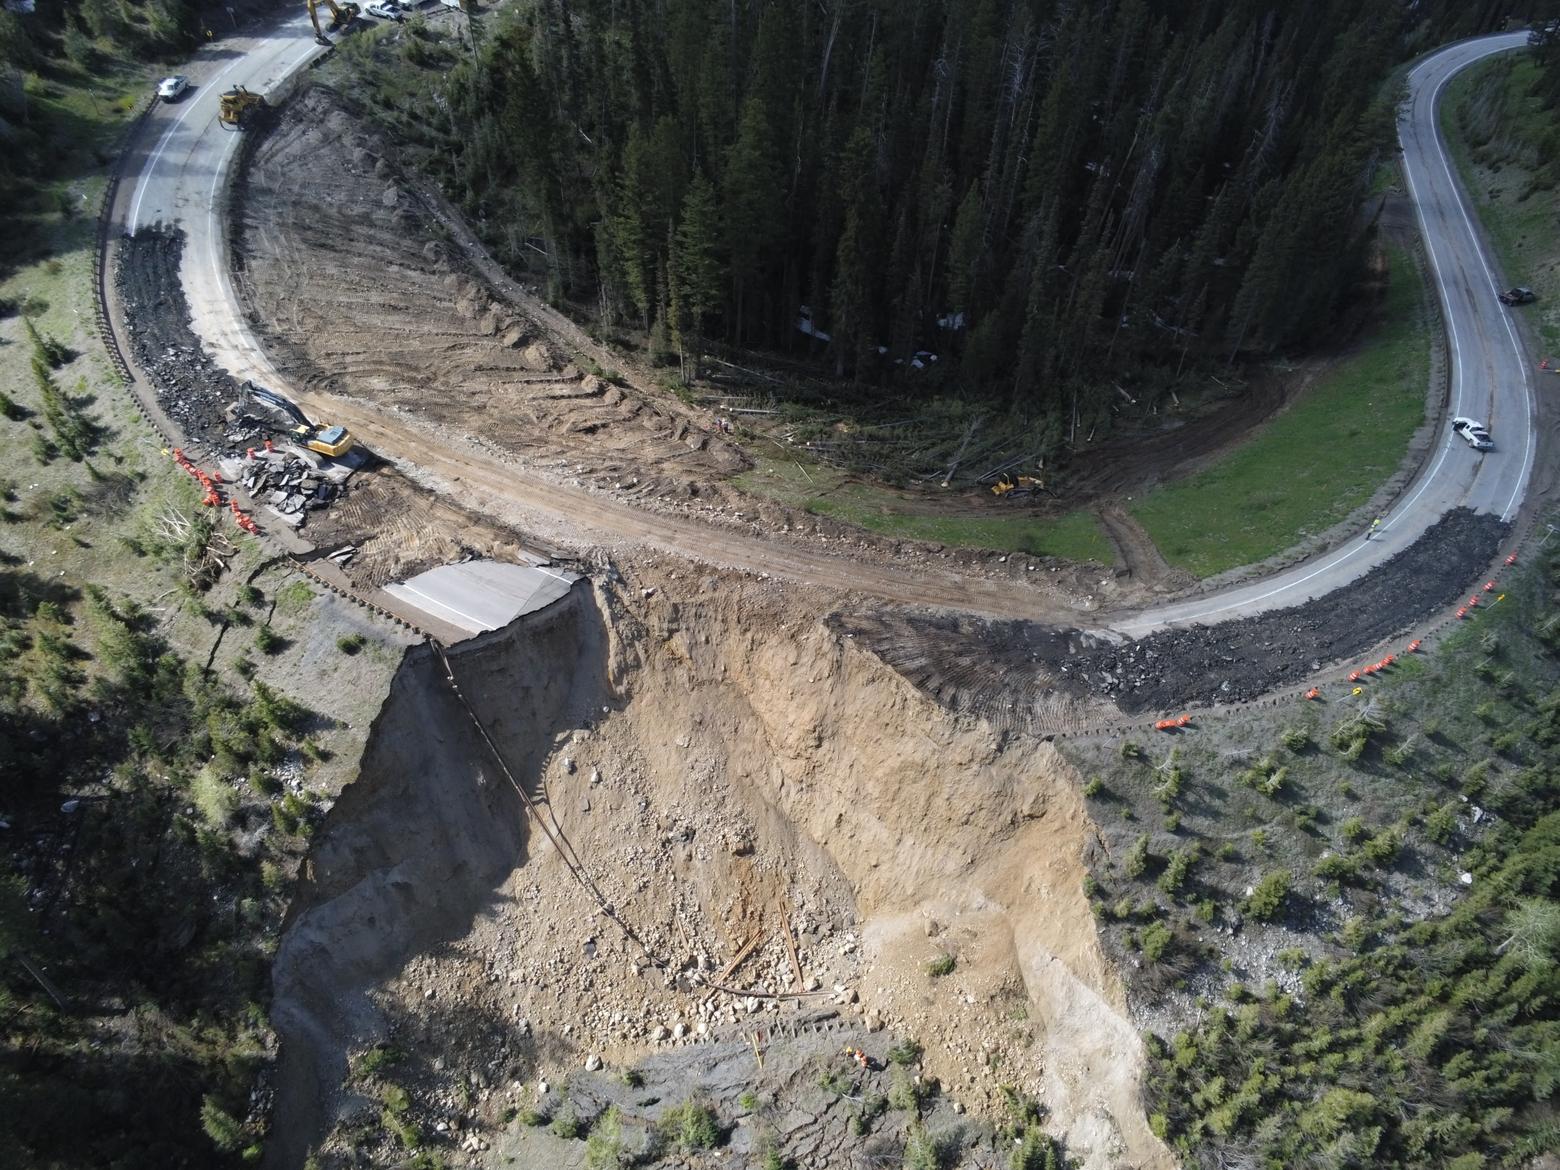 Highway 22 over Teton Pass between Jackson, Wyoming and Victor, Idaho collapsed during a massive landslide. Estimates indicate the local economy is losing $600,000 per day while the road is closed and agencies work toward solutions. Photo courtesy Wyoming Department of Transportation